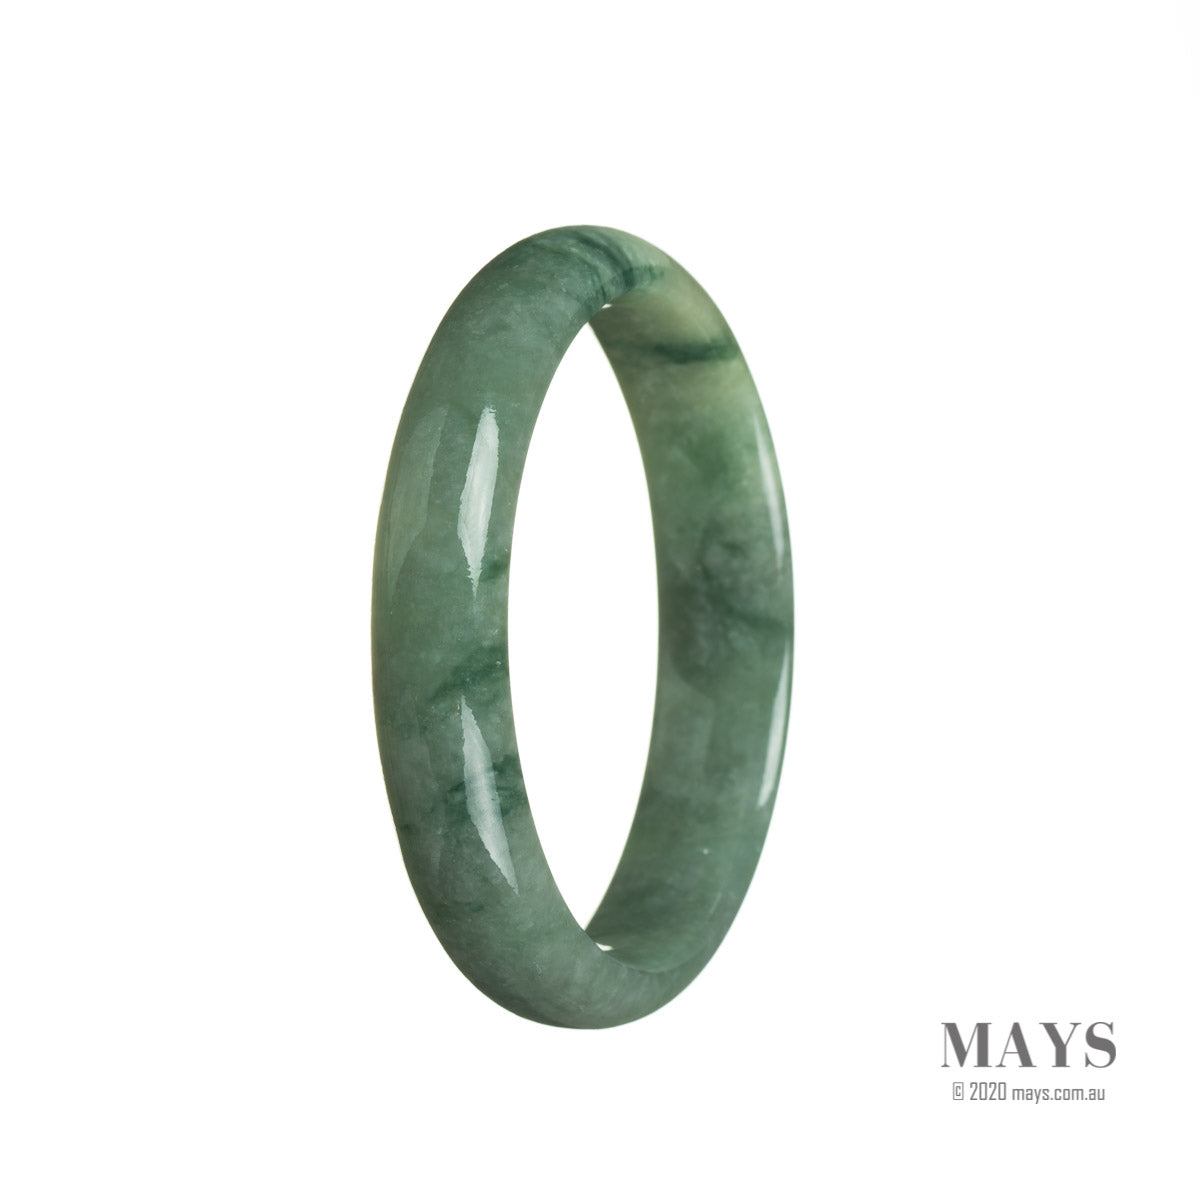 A stunning green jade bangle bracelet with a half-moon shape, made from genuine Grade A green jadeite jade. Perfect for adding a touch of elegance to any outfit.